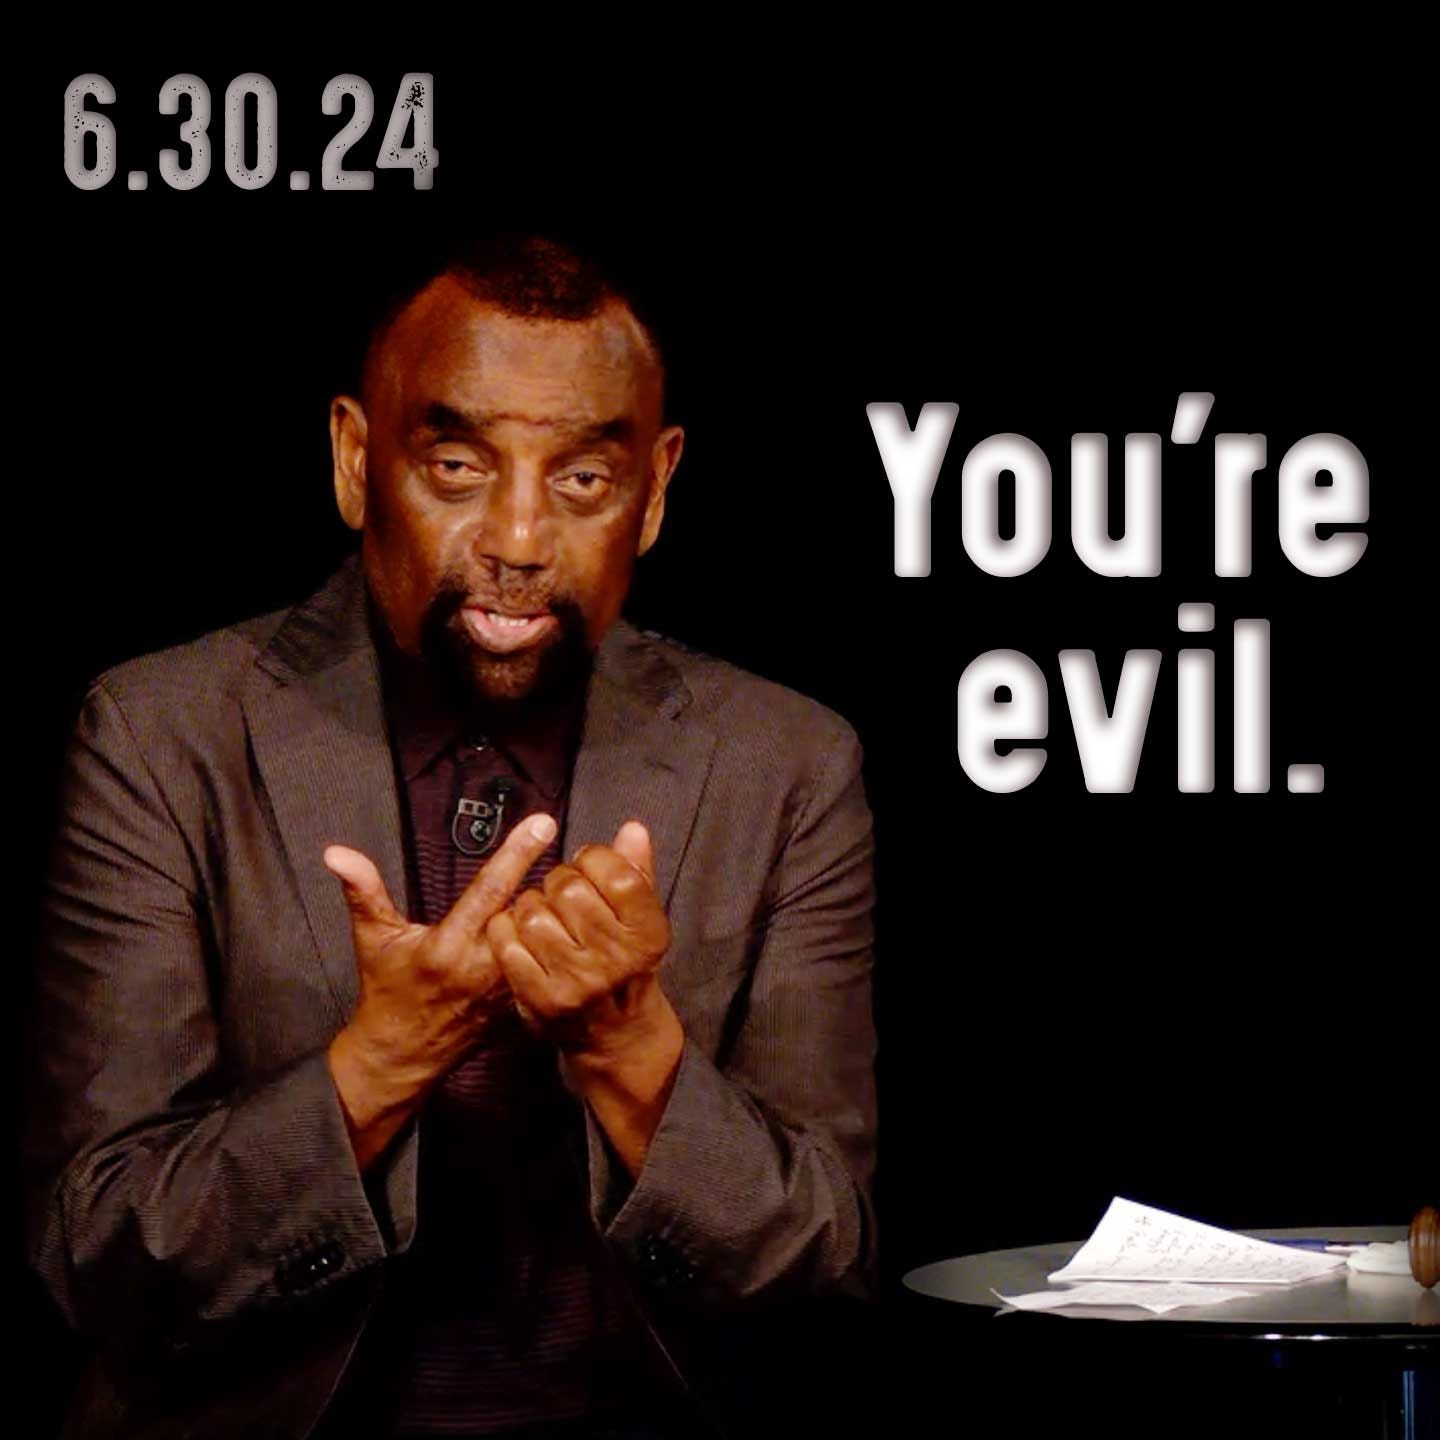 Why is evil able to work with you? | Church 6/30/24